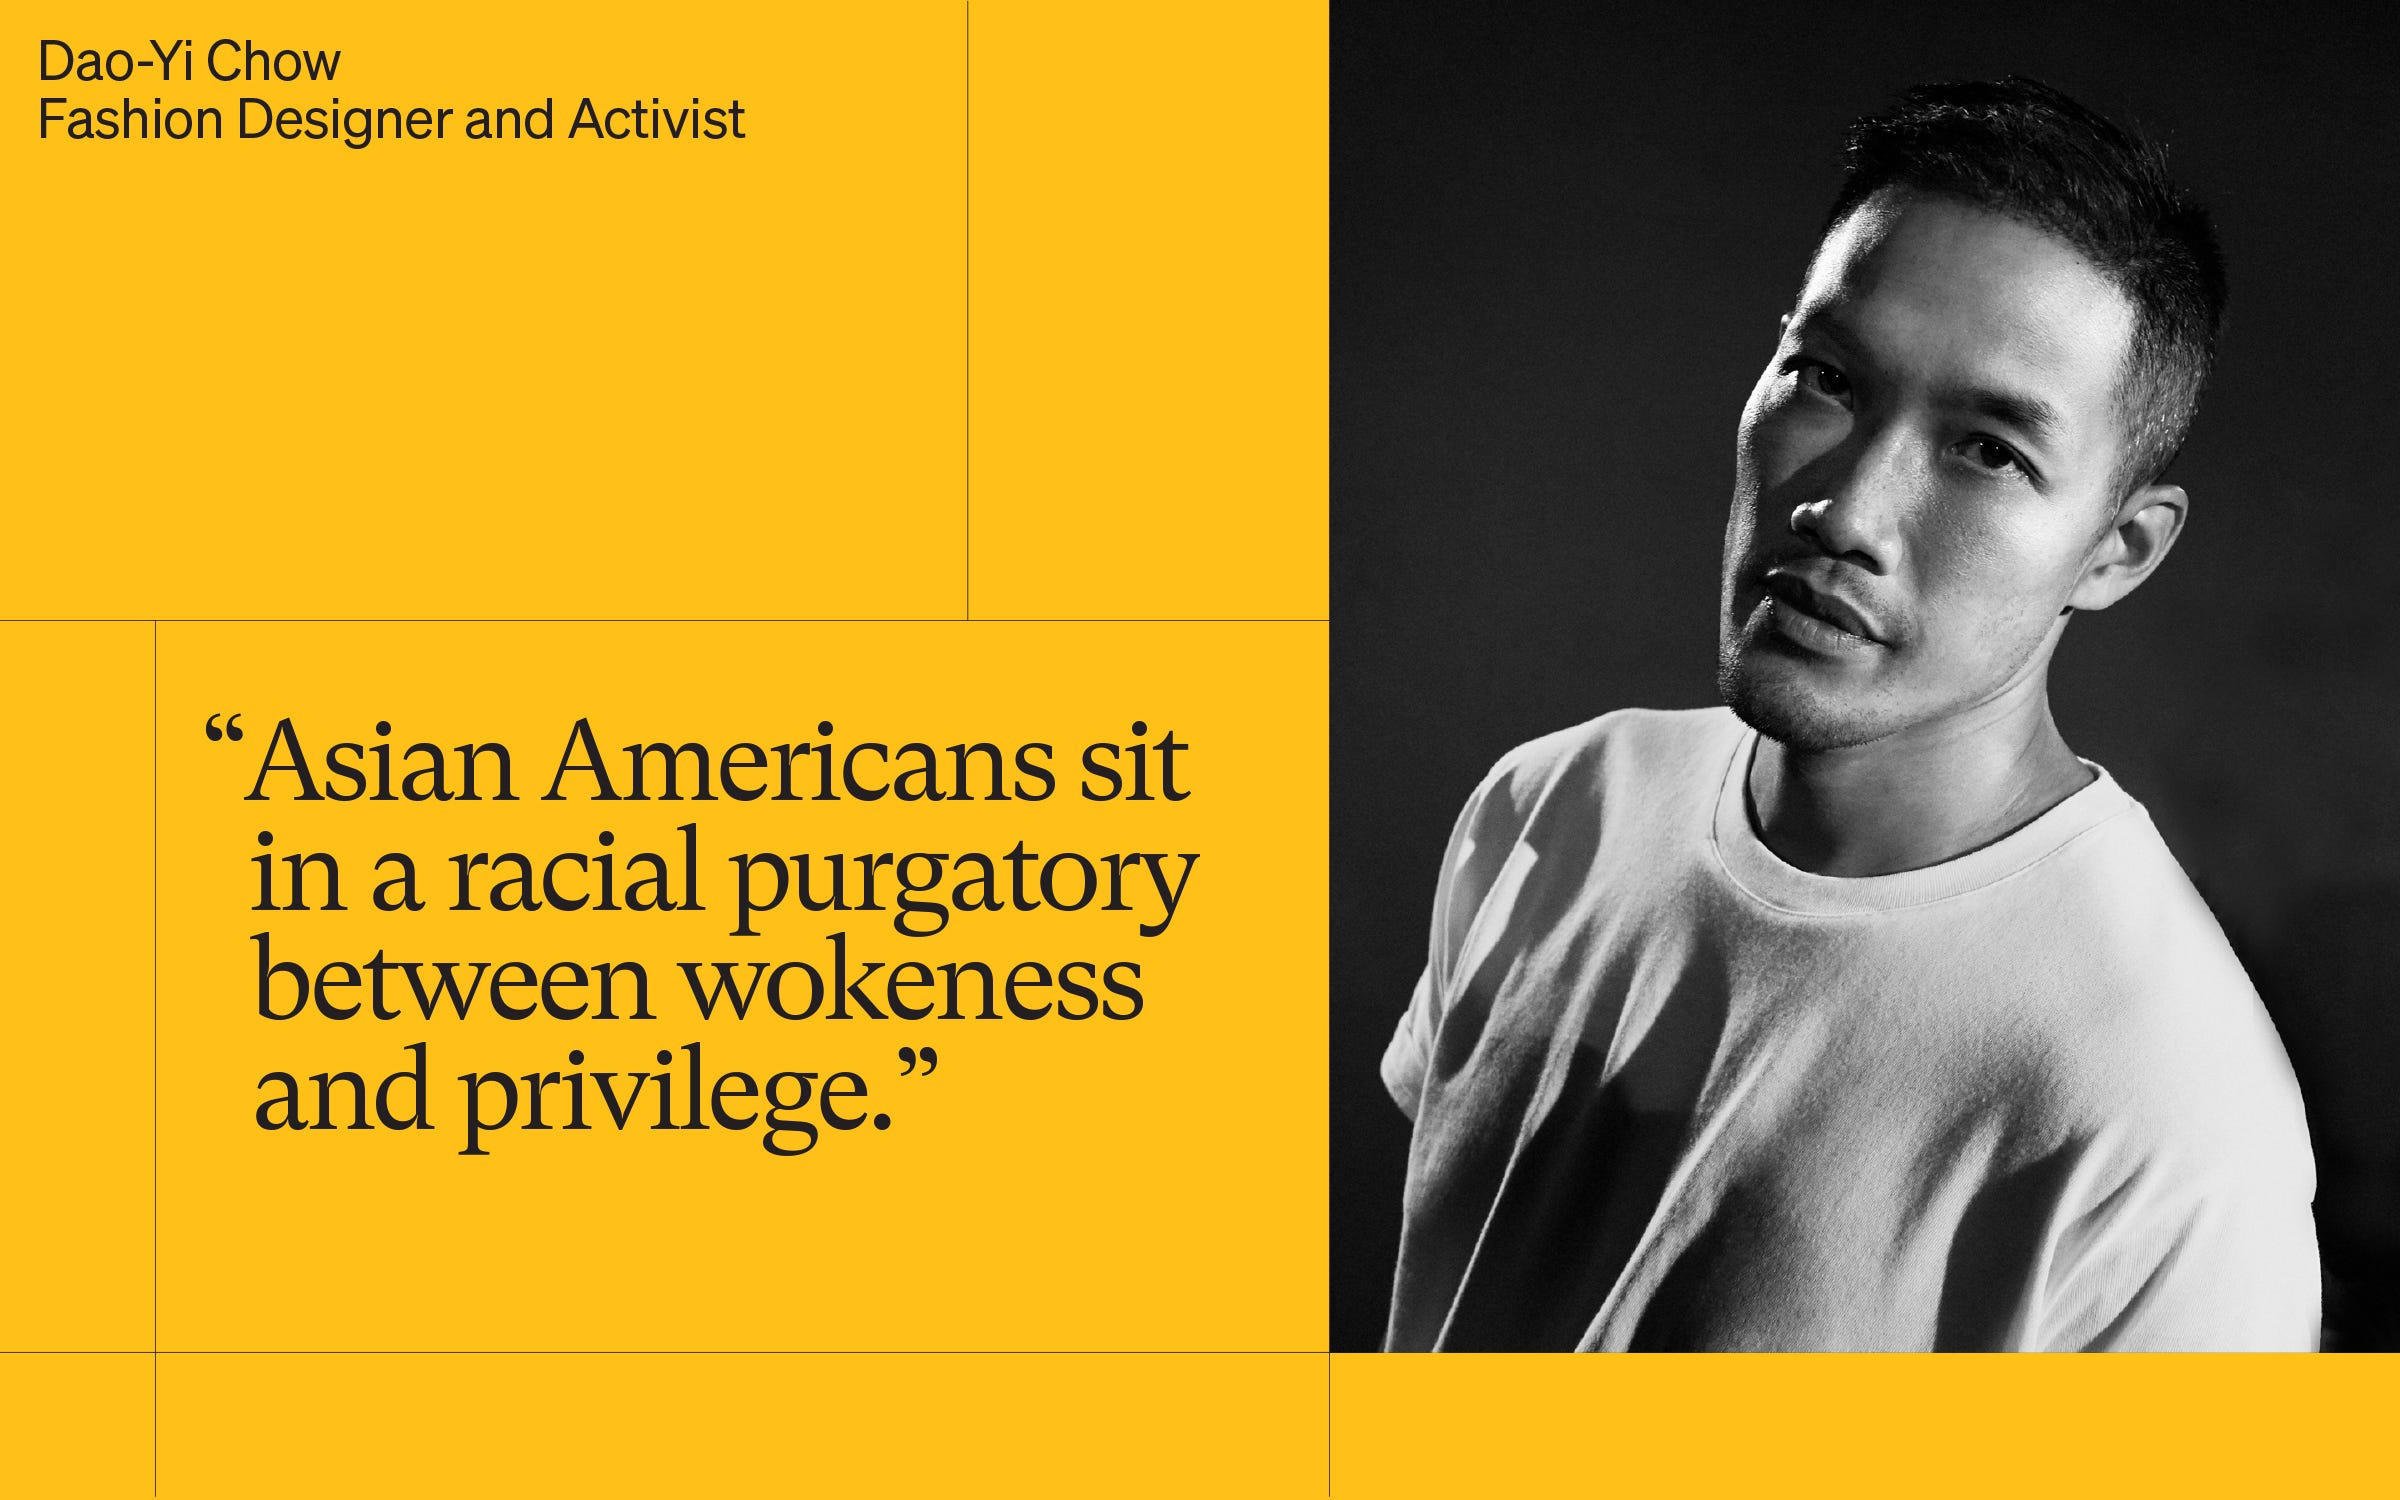 Dao-Yi Chow Wants Asian Americans to Interrogate Their Privilege